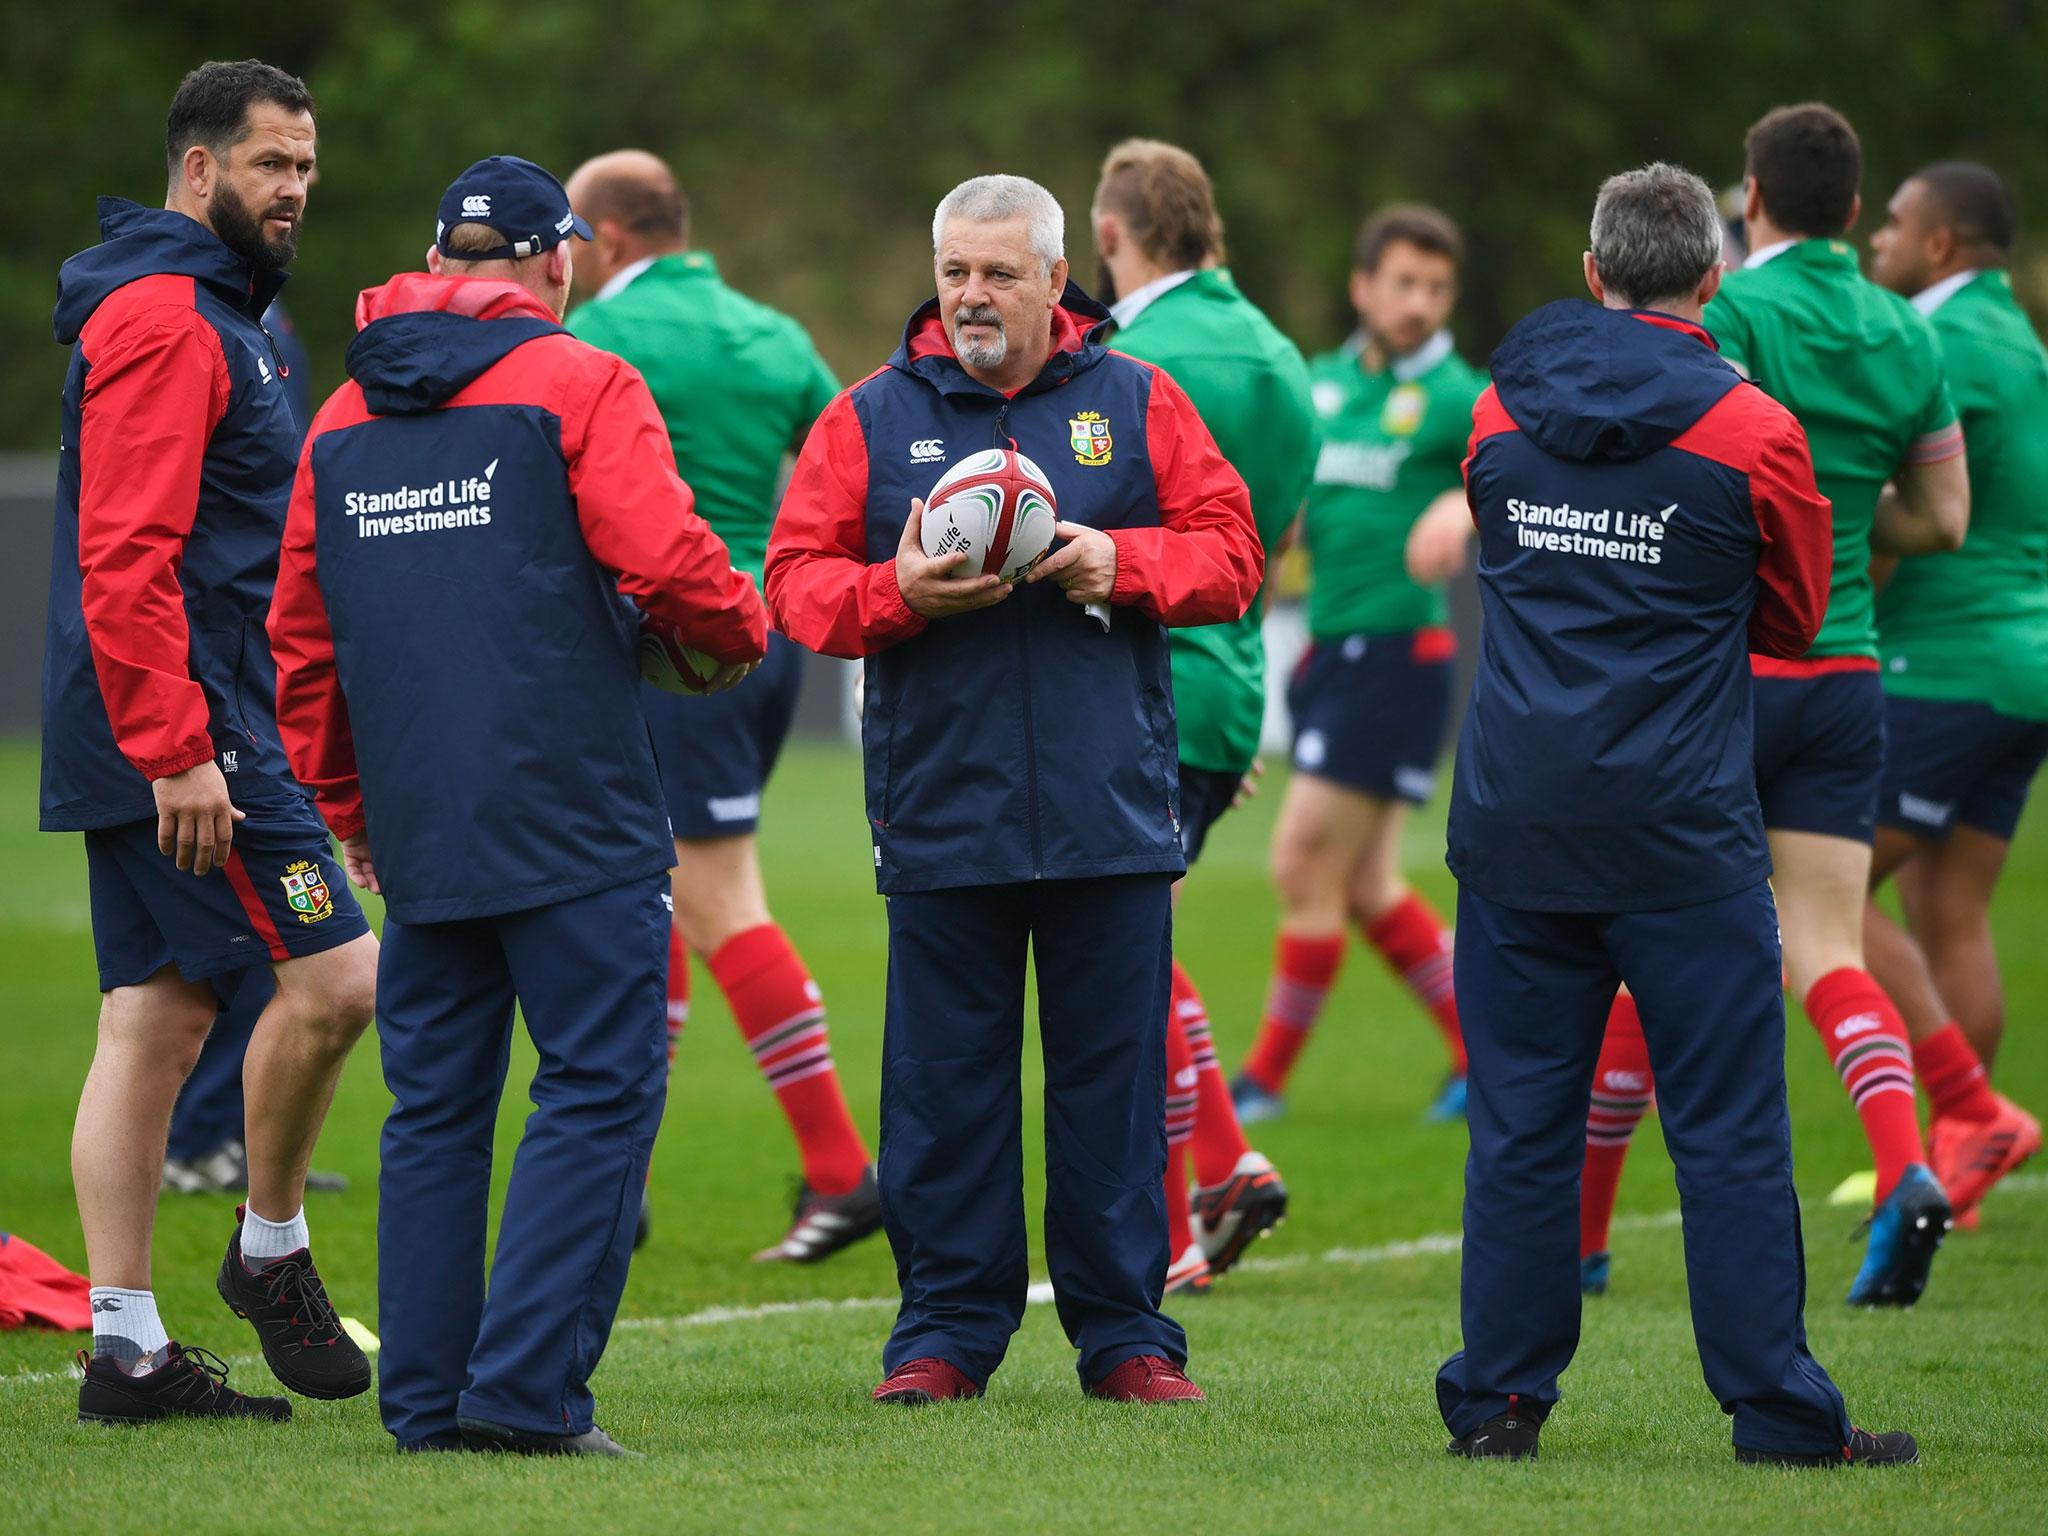 The British and Irish Lions future is not under threat, according to Ian Ritchie